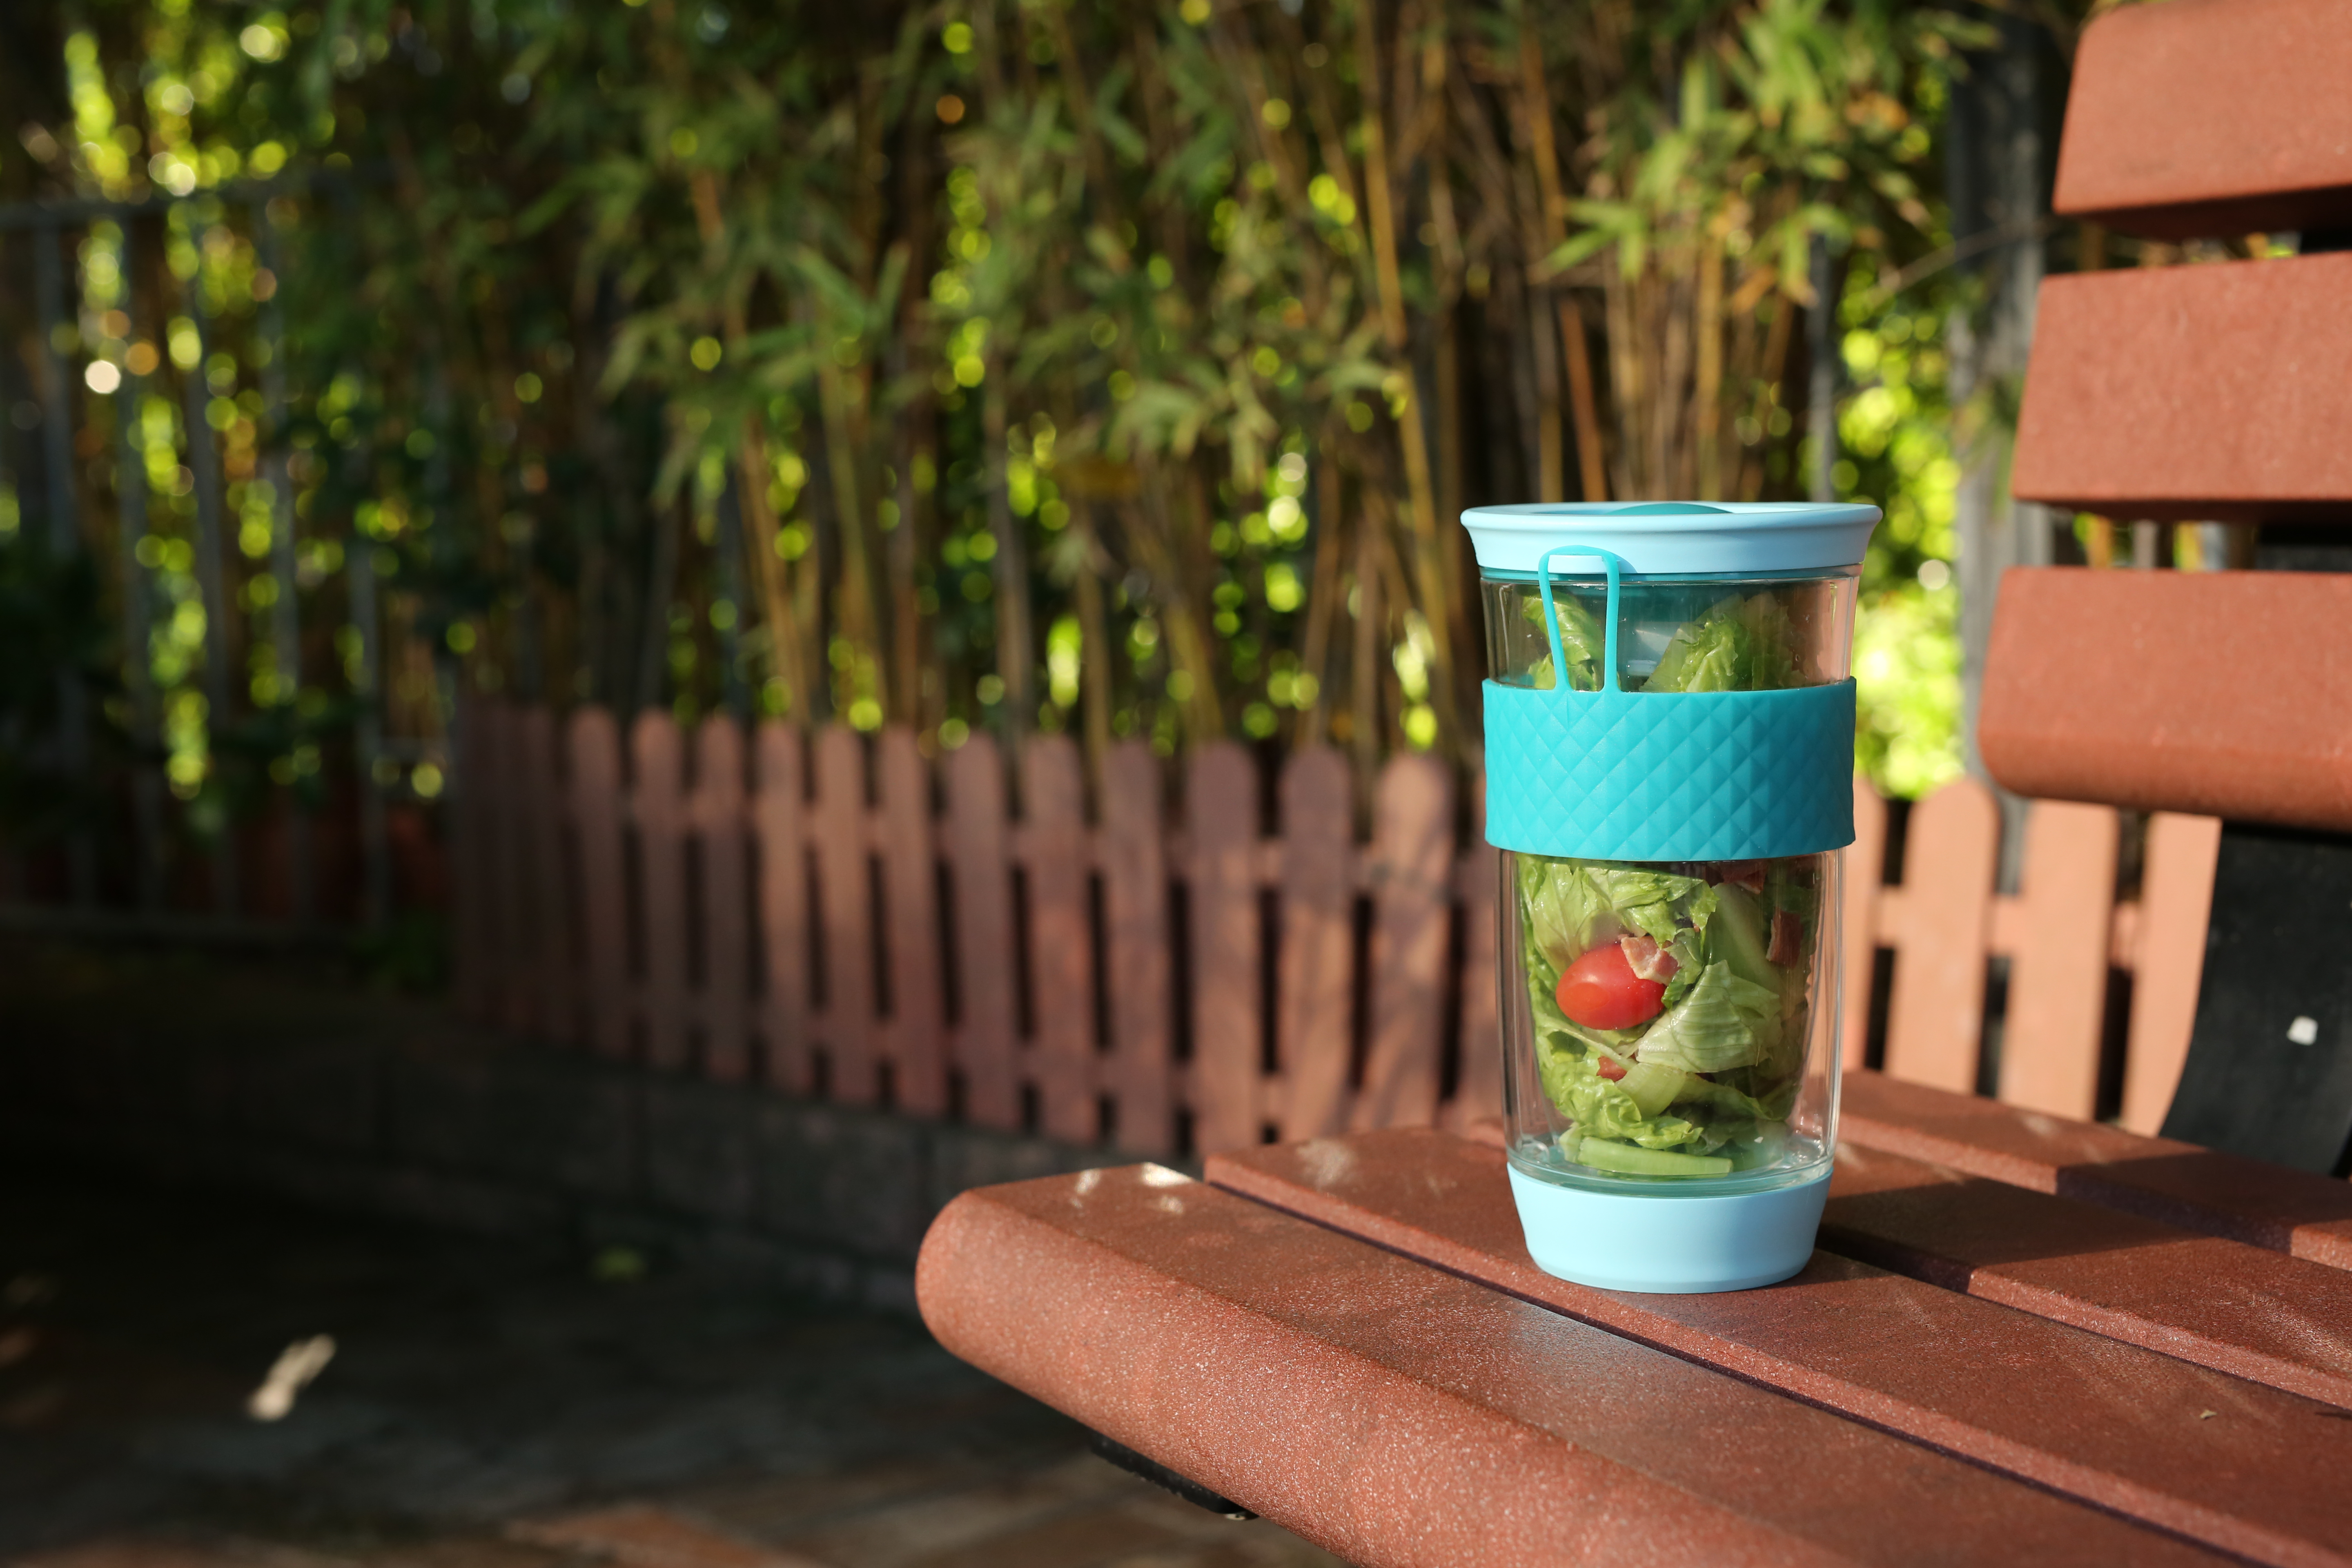 To-go salad shaker & container design